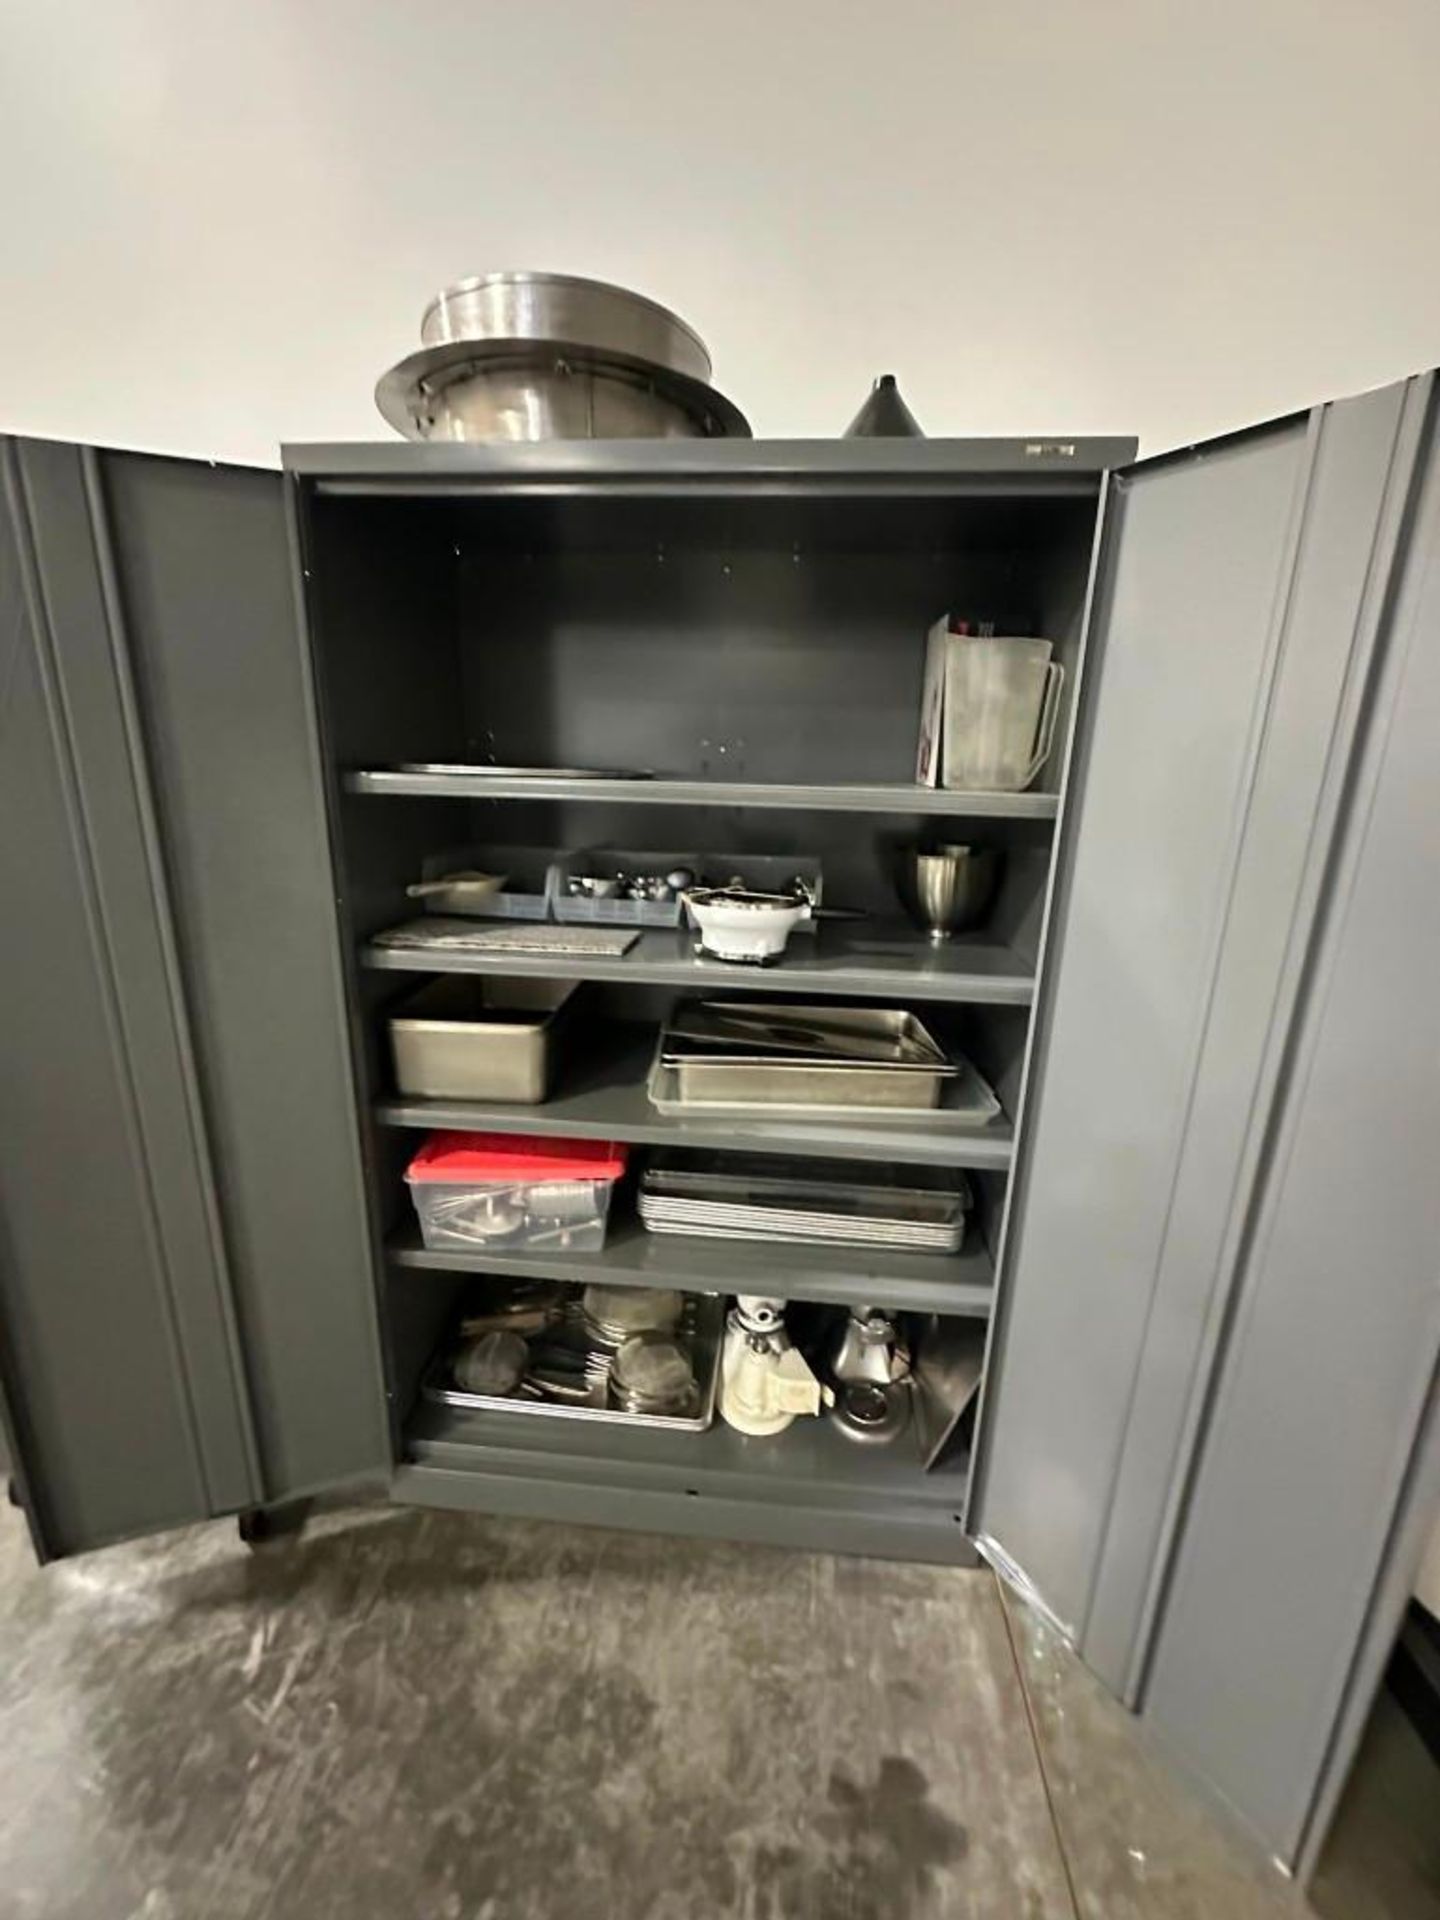 Lot: Uline Steel Cabinet with Assorted Pans, Cookware, and Misc. Contents - Image 2 of 3